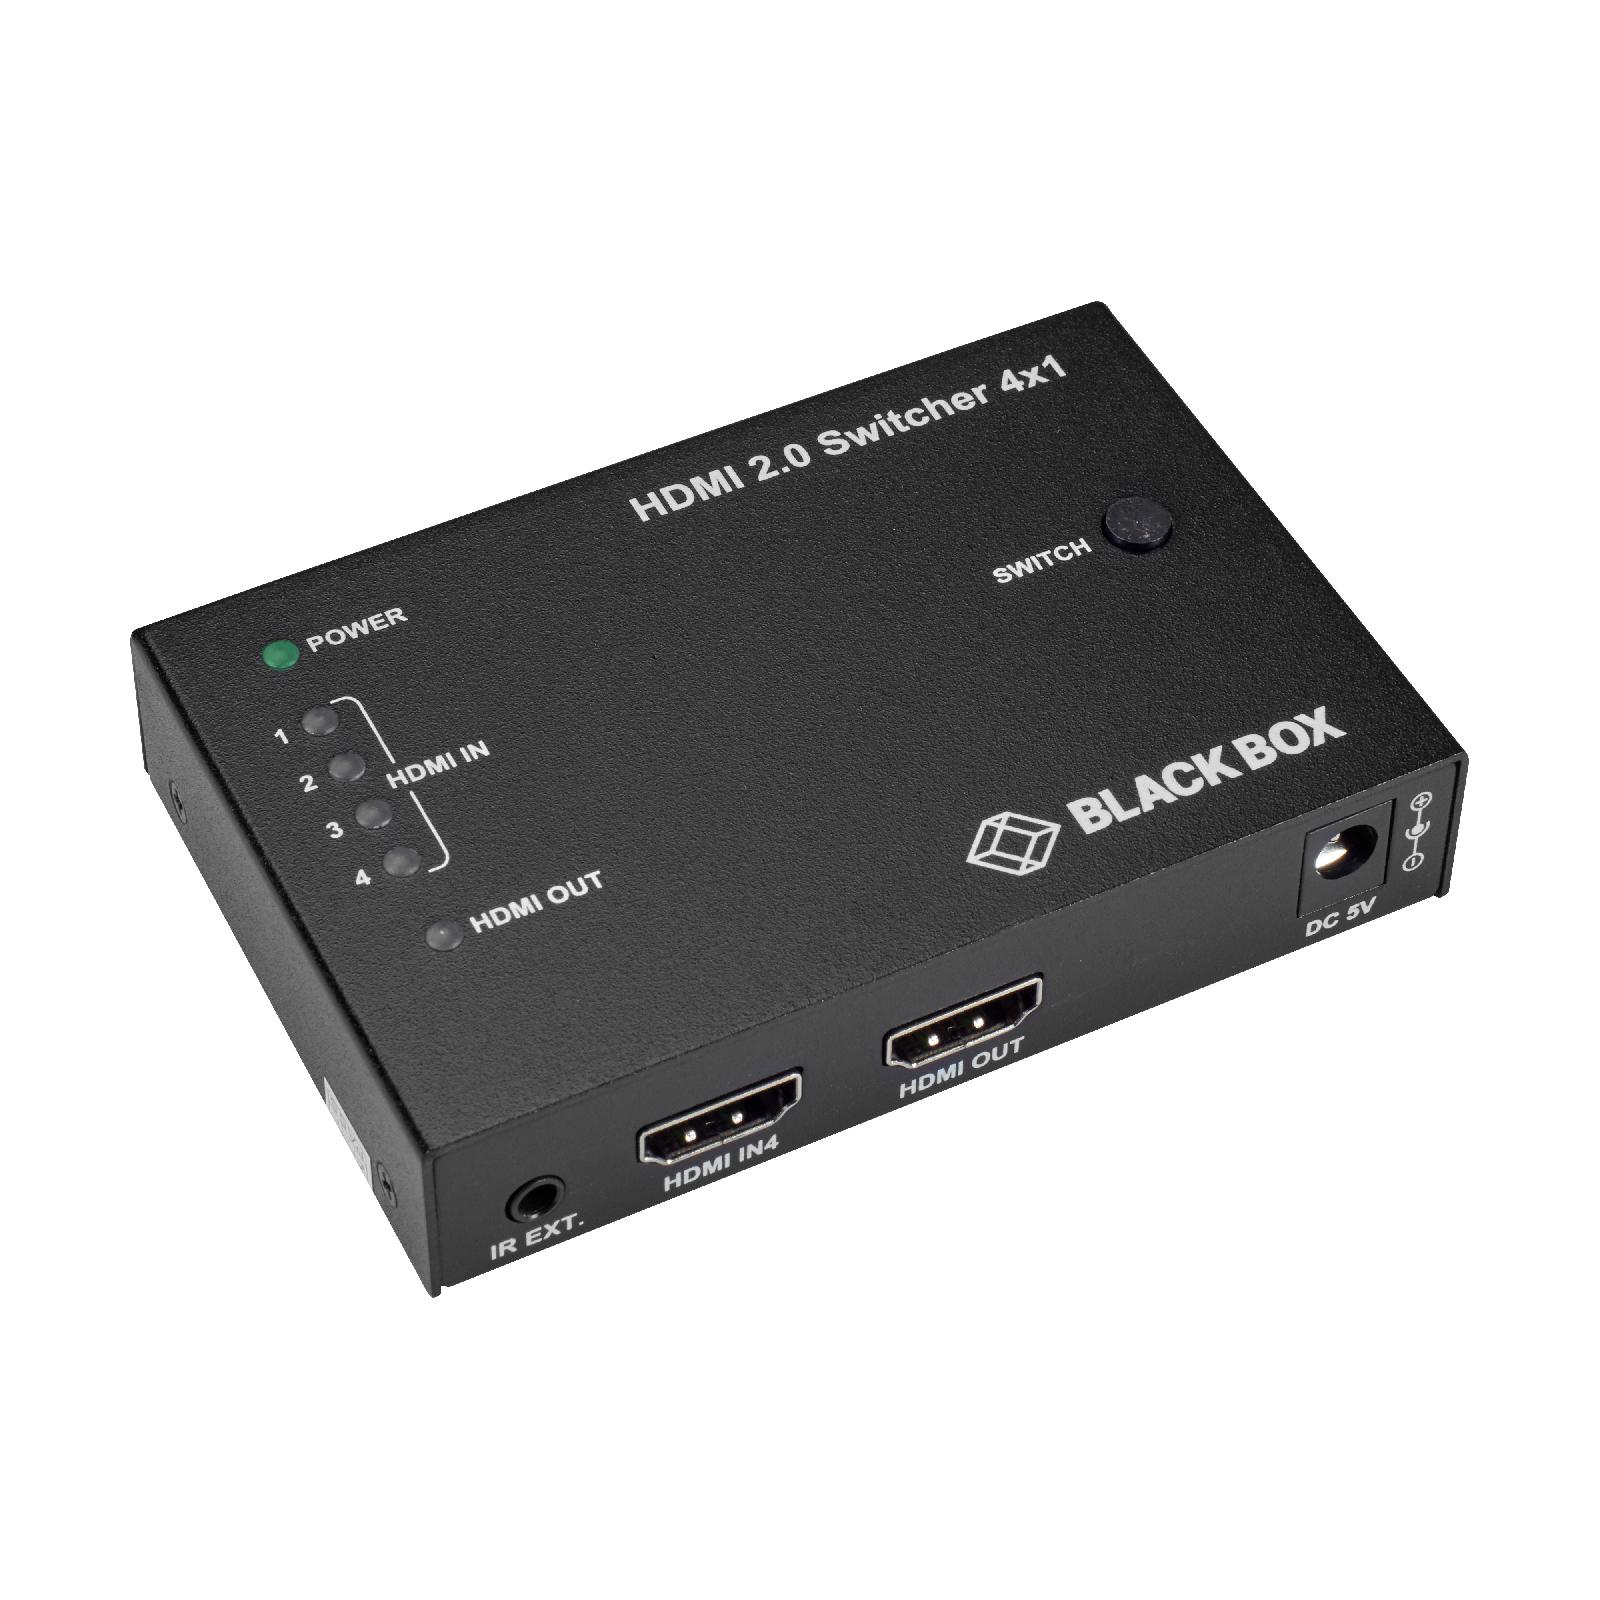 Blackbox HDMI 2.0 4K Video Switch - 4x1 Cost-effective, compact, easy-to-install switch for reliable 4-to-1 4K video switching